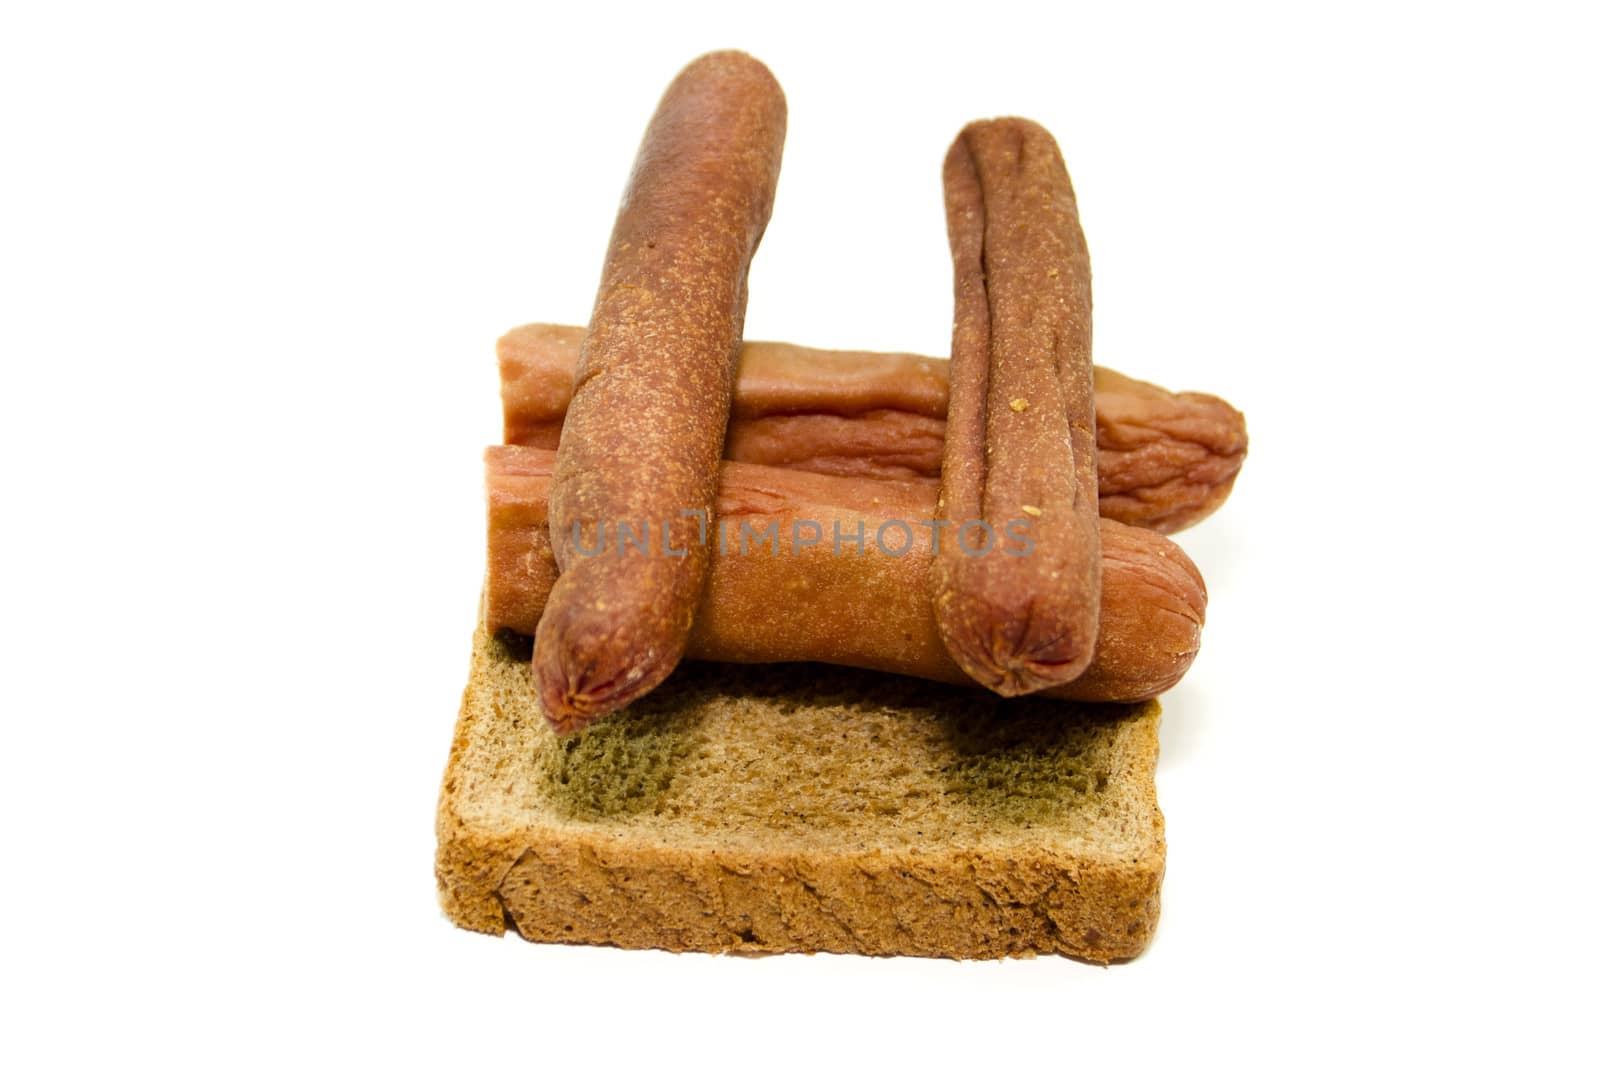 Roasted Hot Dogs with Brown Toast Bread by KEVMA21